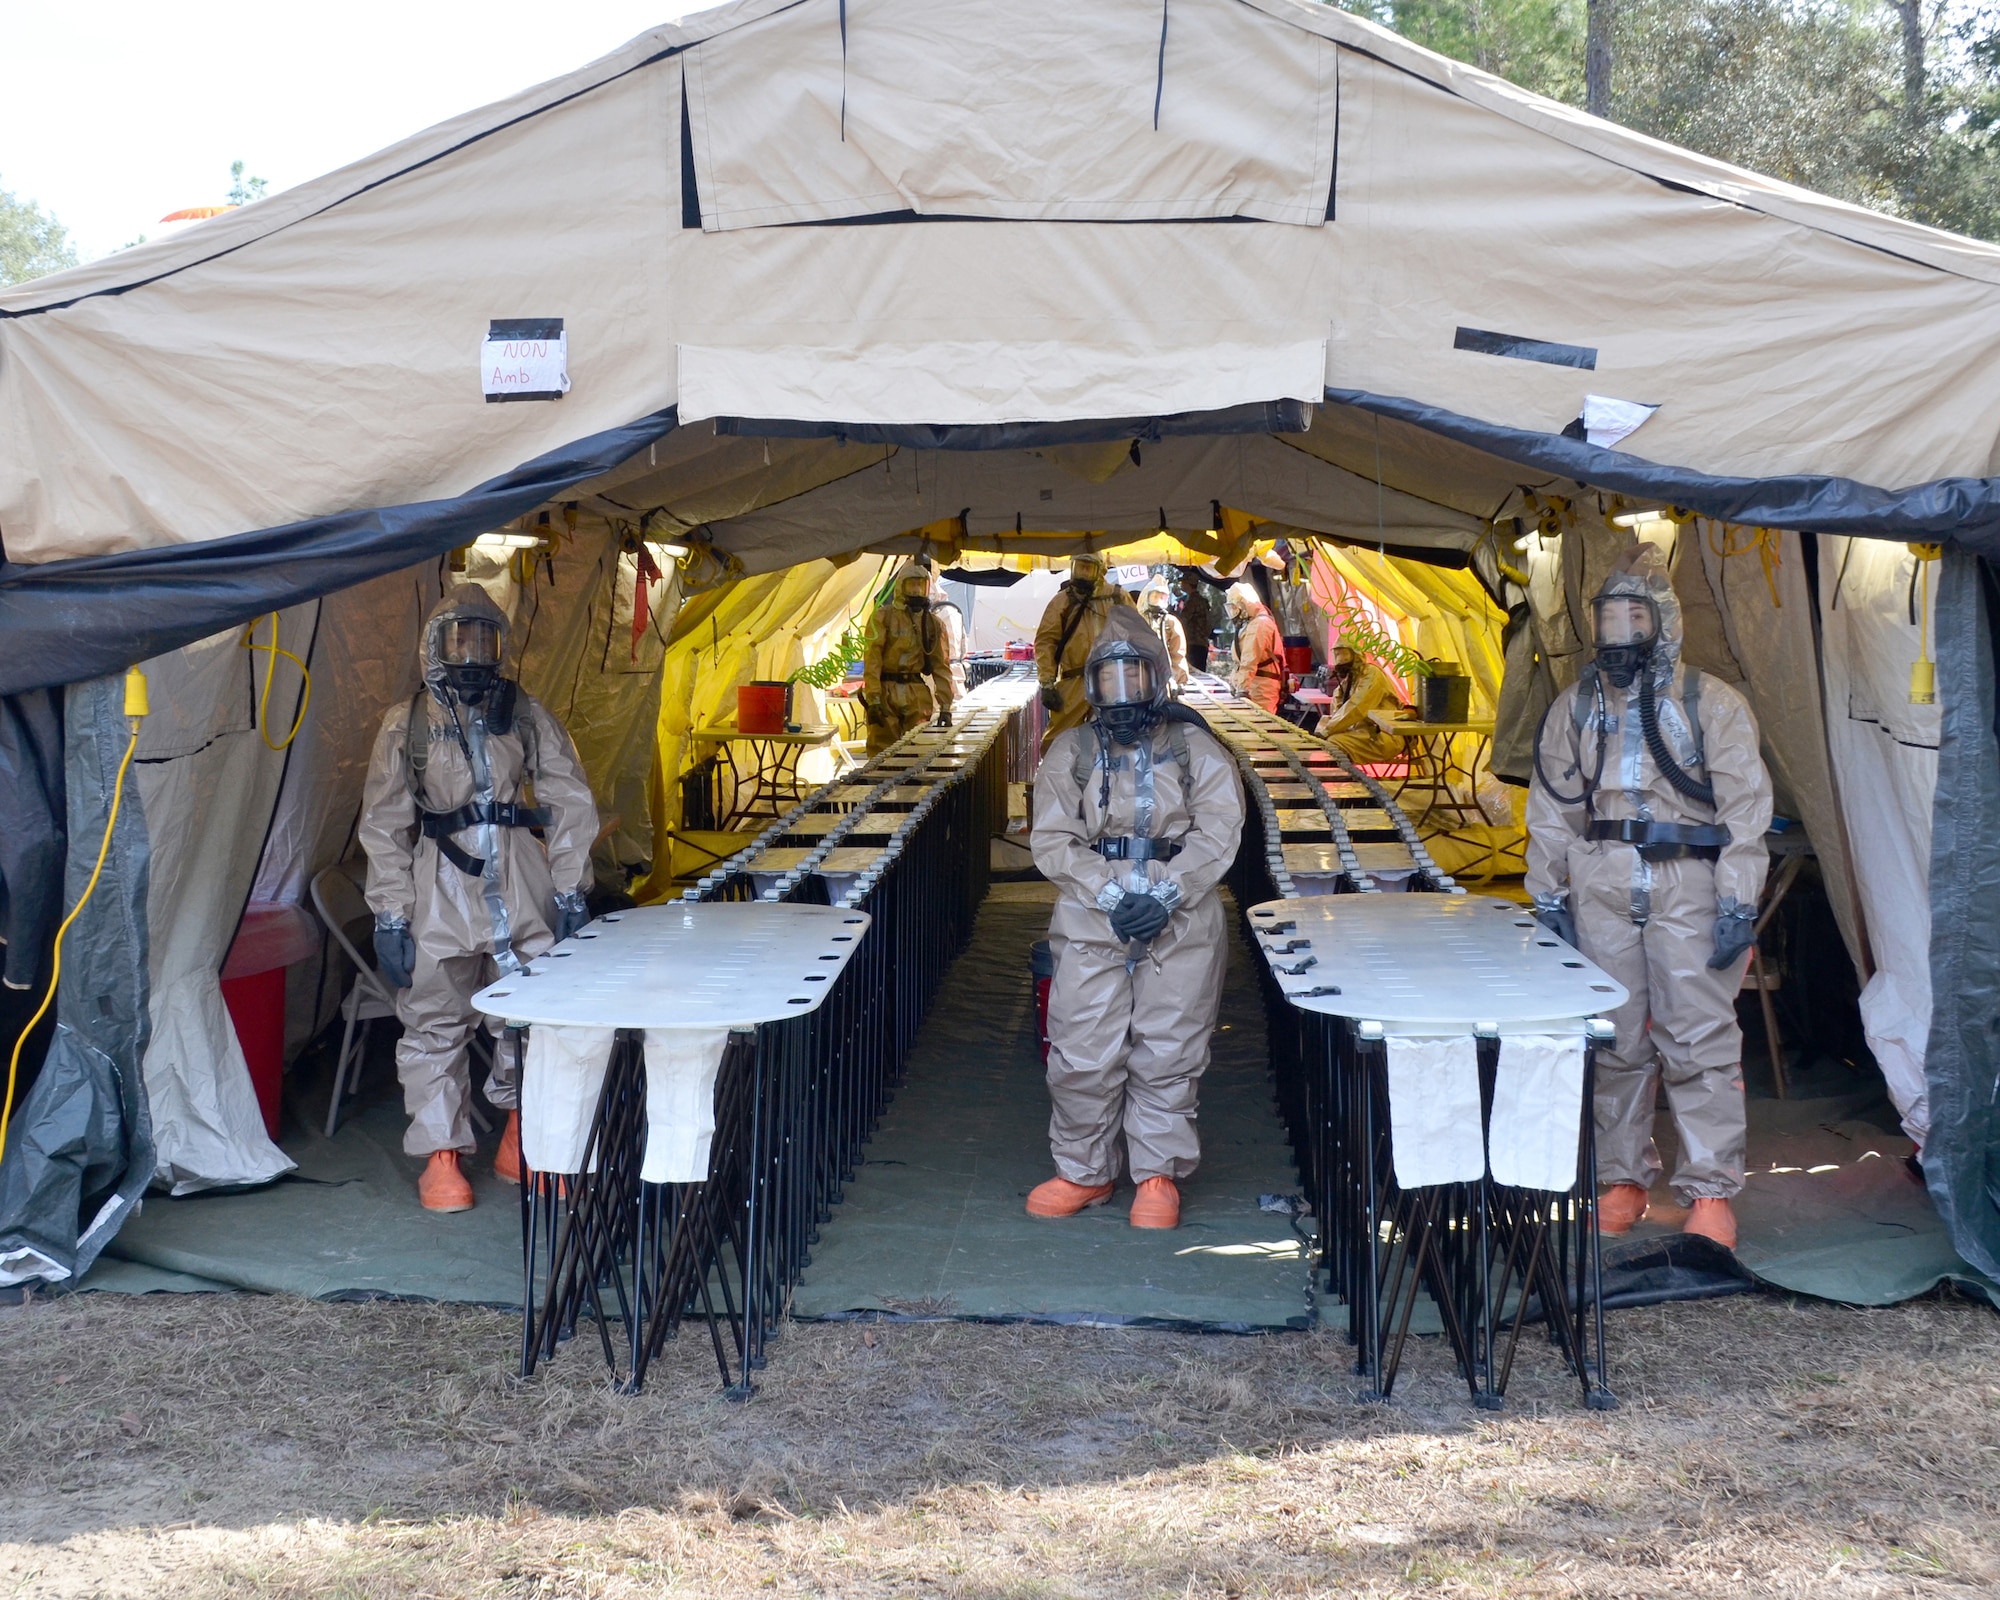 Guardsmen with Kentucky's CBRNE Enhanced Response Force Package, or CERFP, prepare their decontamination station to process non-ambulatory simulated victims during an exercise evaluation at Camp Blanding, Fla., Jan. 10, 2019. The CERFP was tasked with responding to a 10-kiloton nuclear explosion, establishing a support zone, searching the hot zone for victims, extracting and decontaminating the victims, and providing medical assistance. (U.S. Army National Guard photo by Sgt. Taylor Tribble)